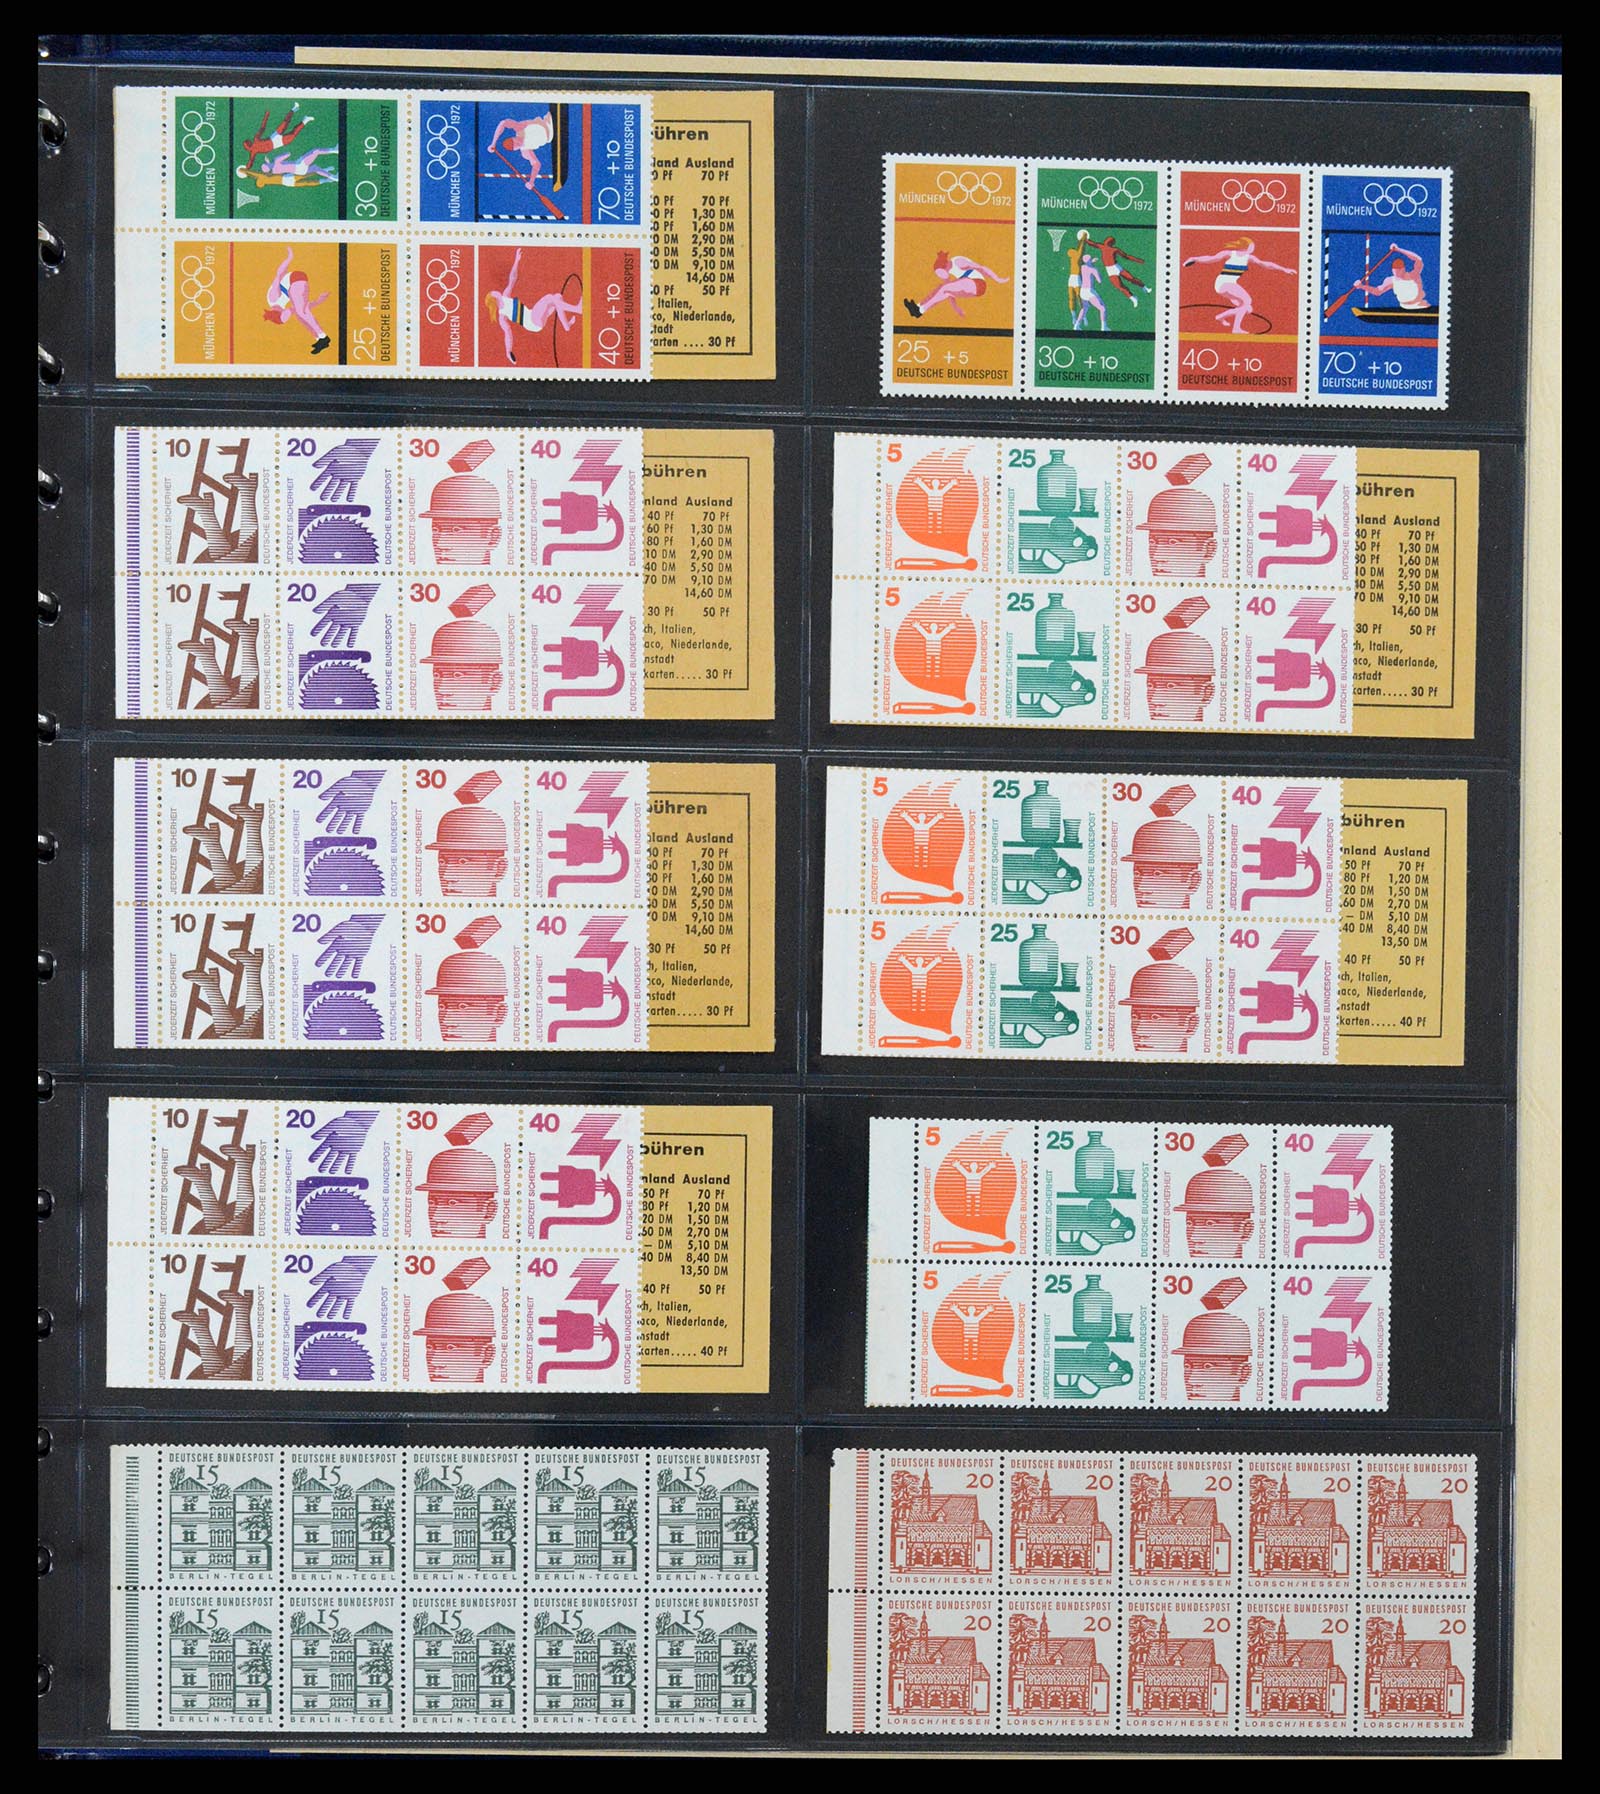 37365 020 - Stamp collection 37365 Bundespost stamp booklets 1951-2001.